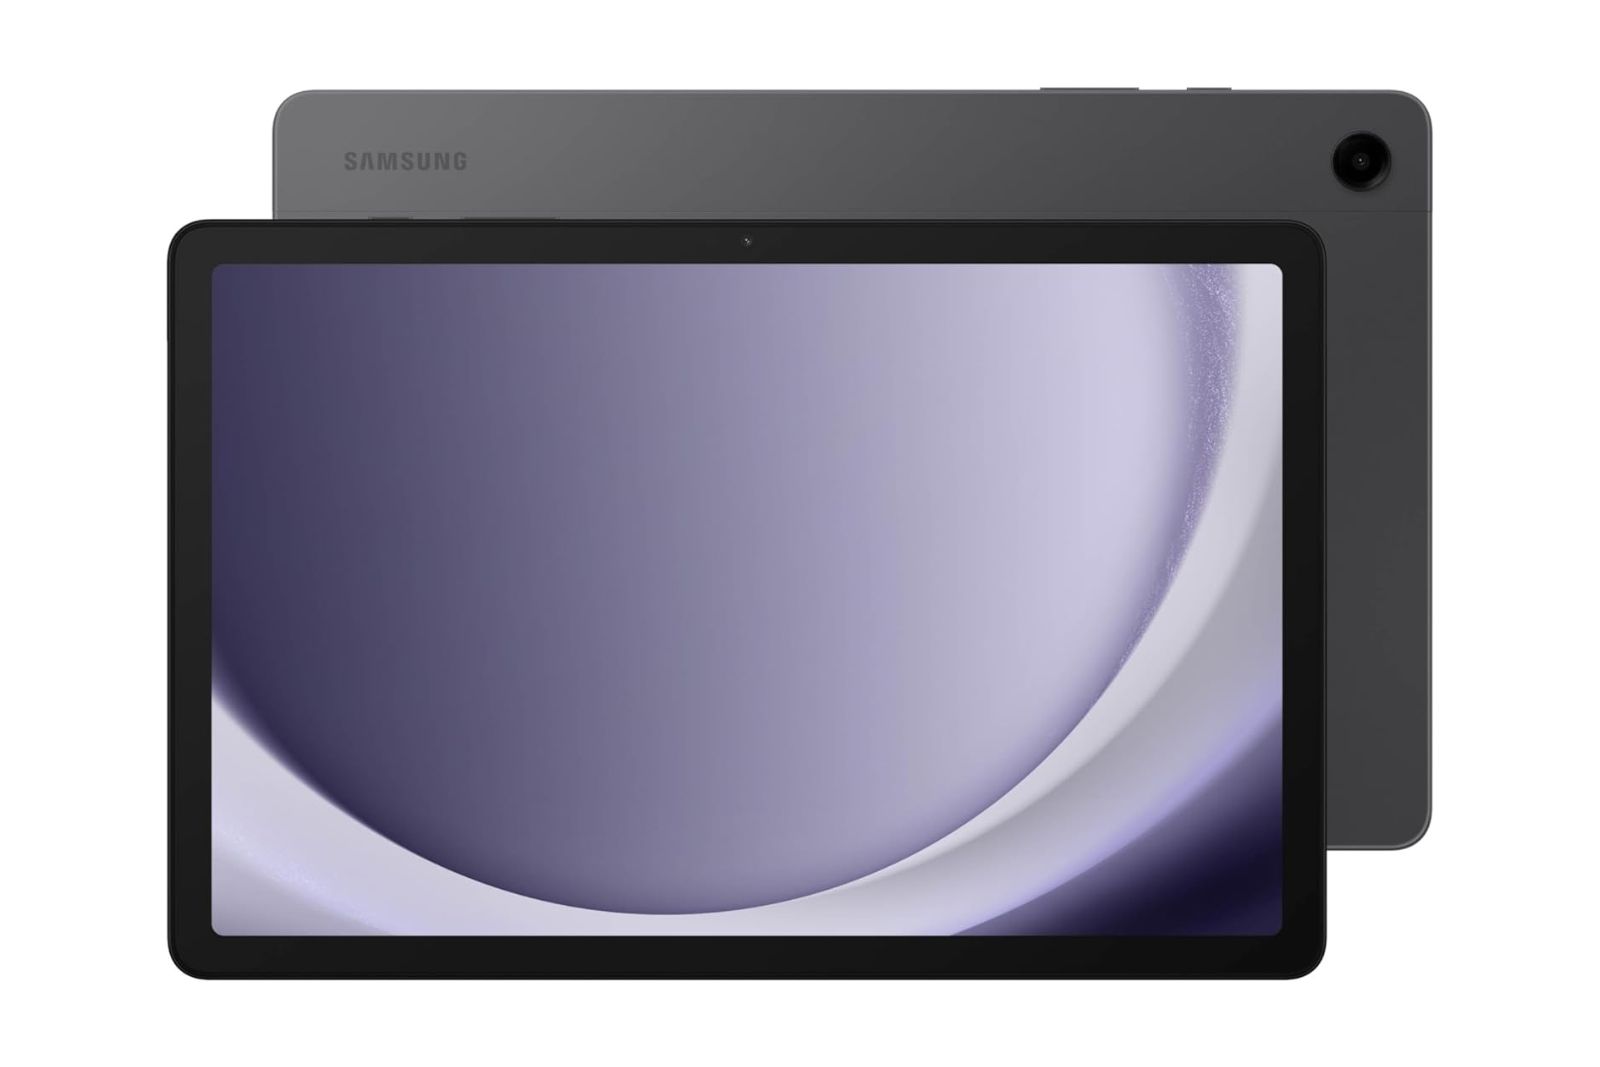 A black and grey Samsung tablet in horizontal orientation on a white background.